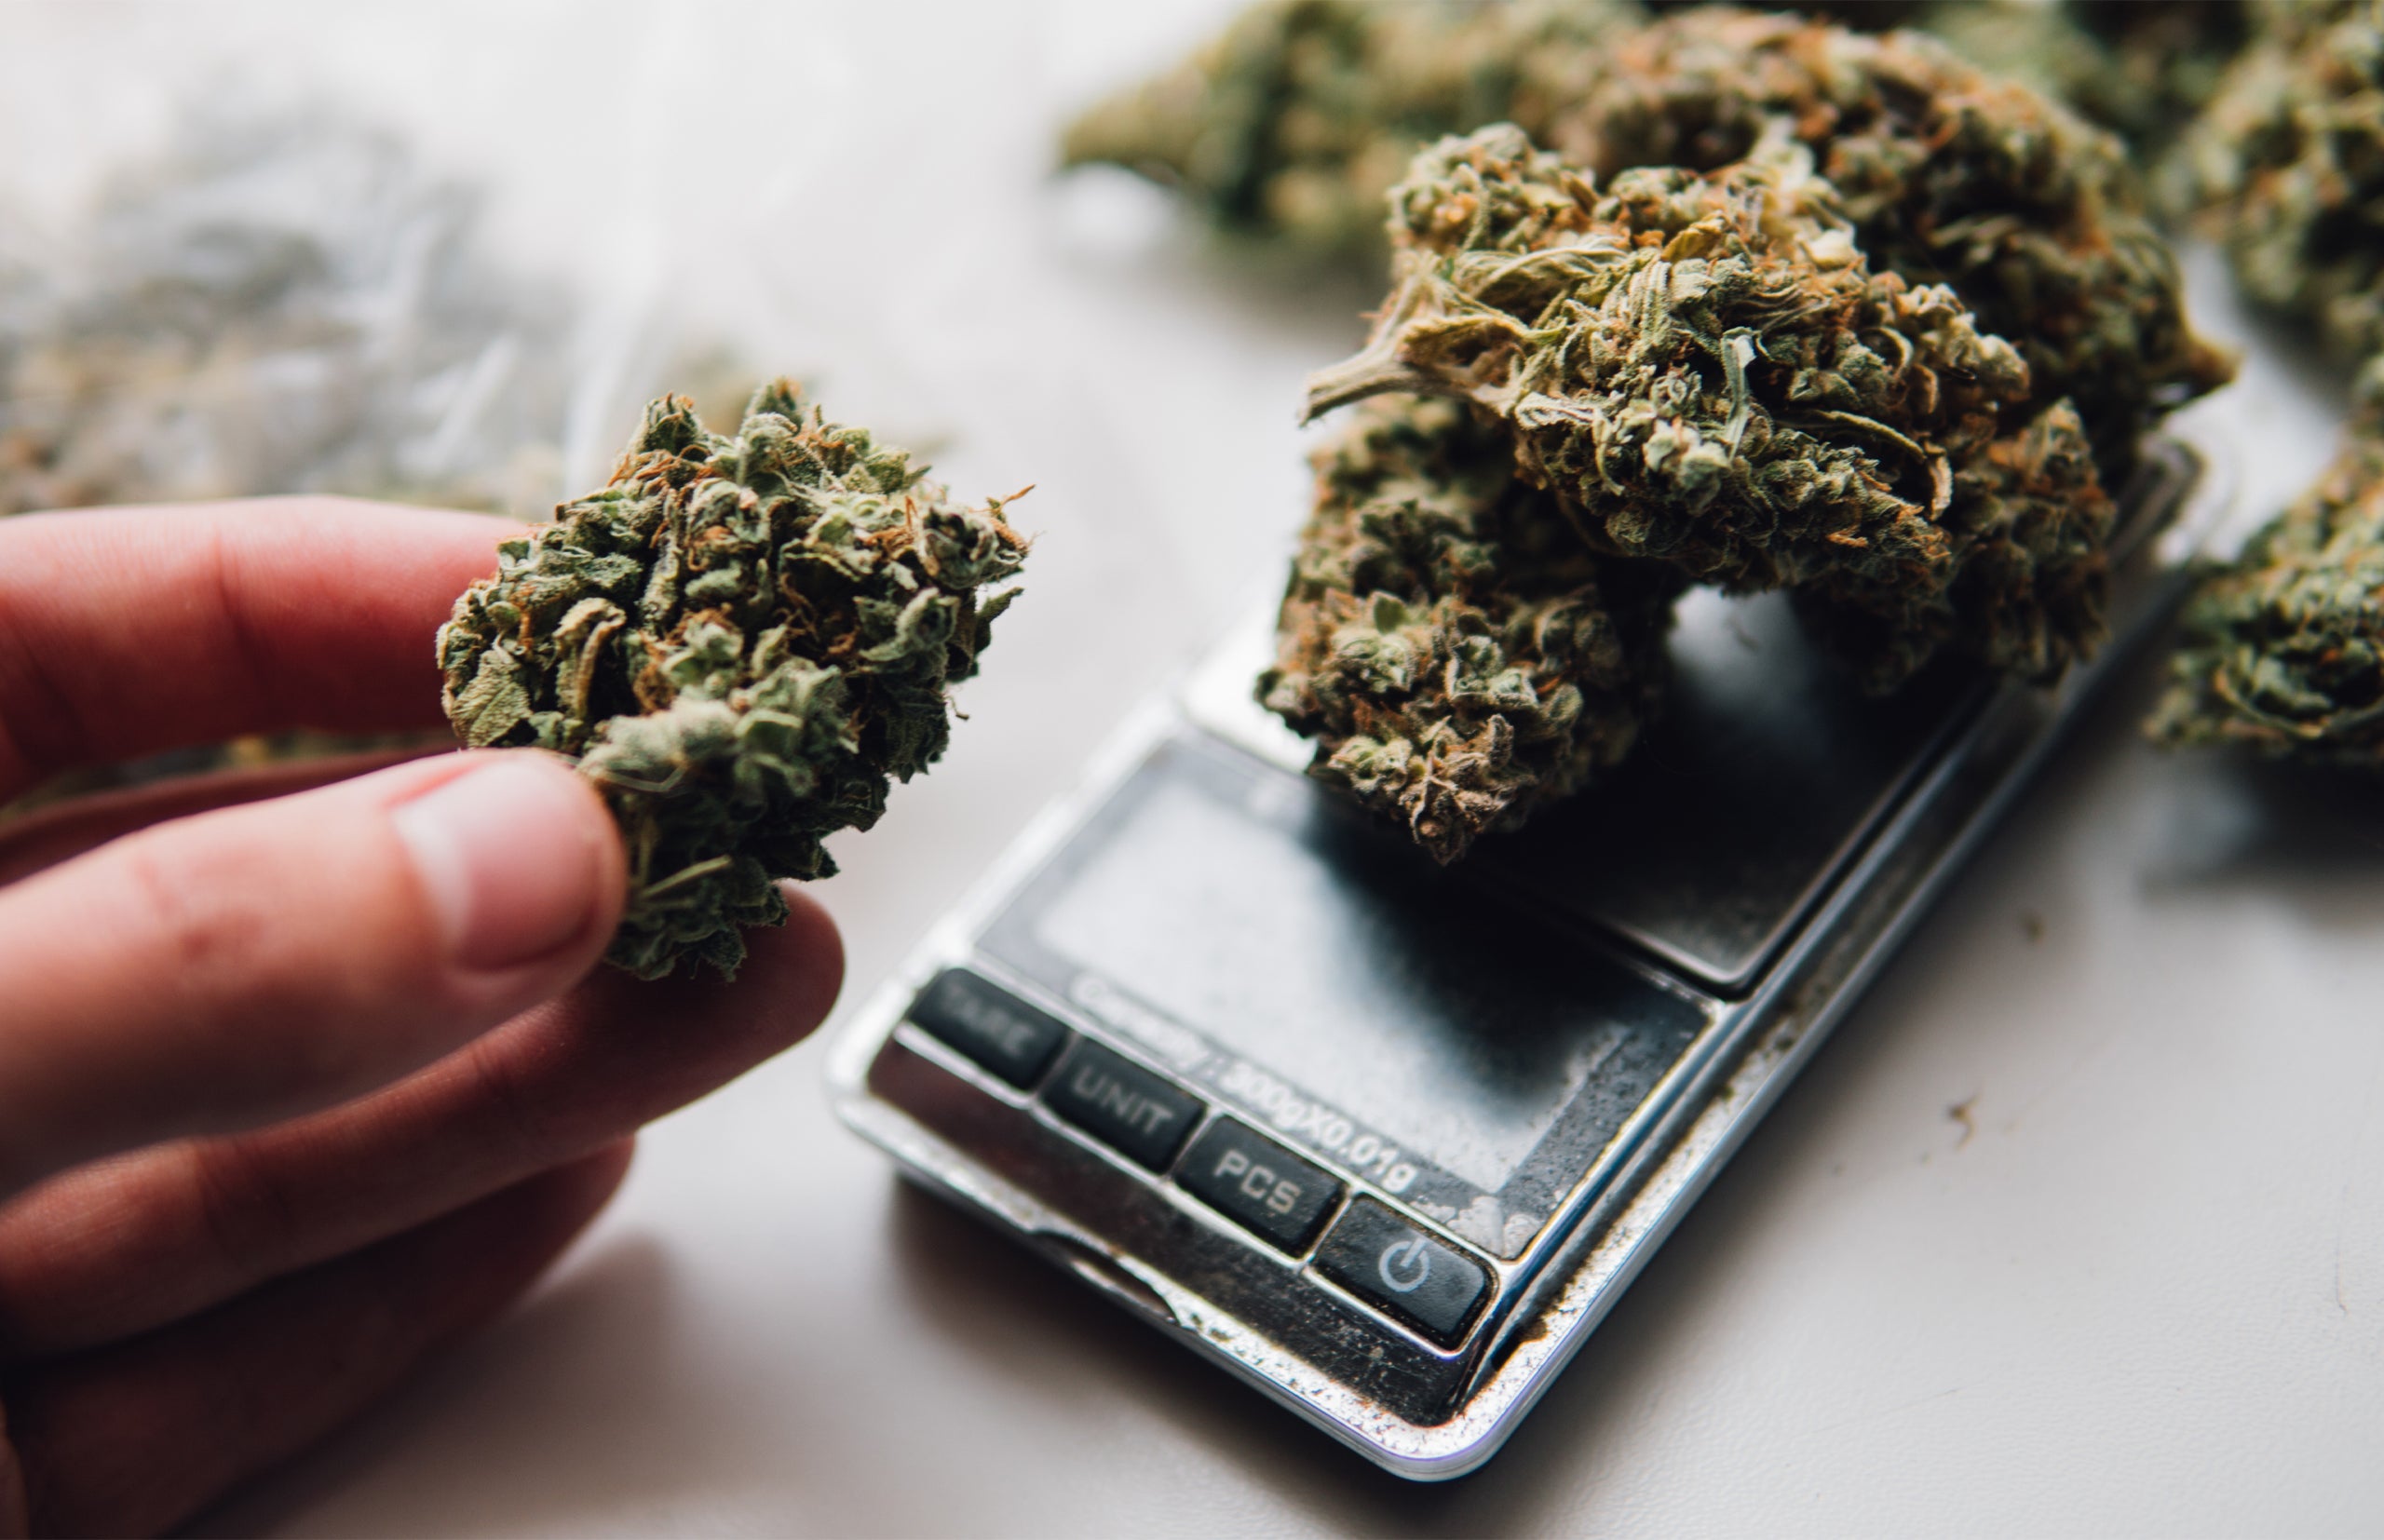 The Definitive Guide to Weed Sizes and Weights